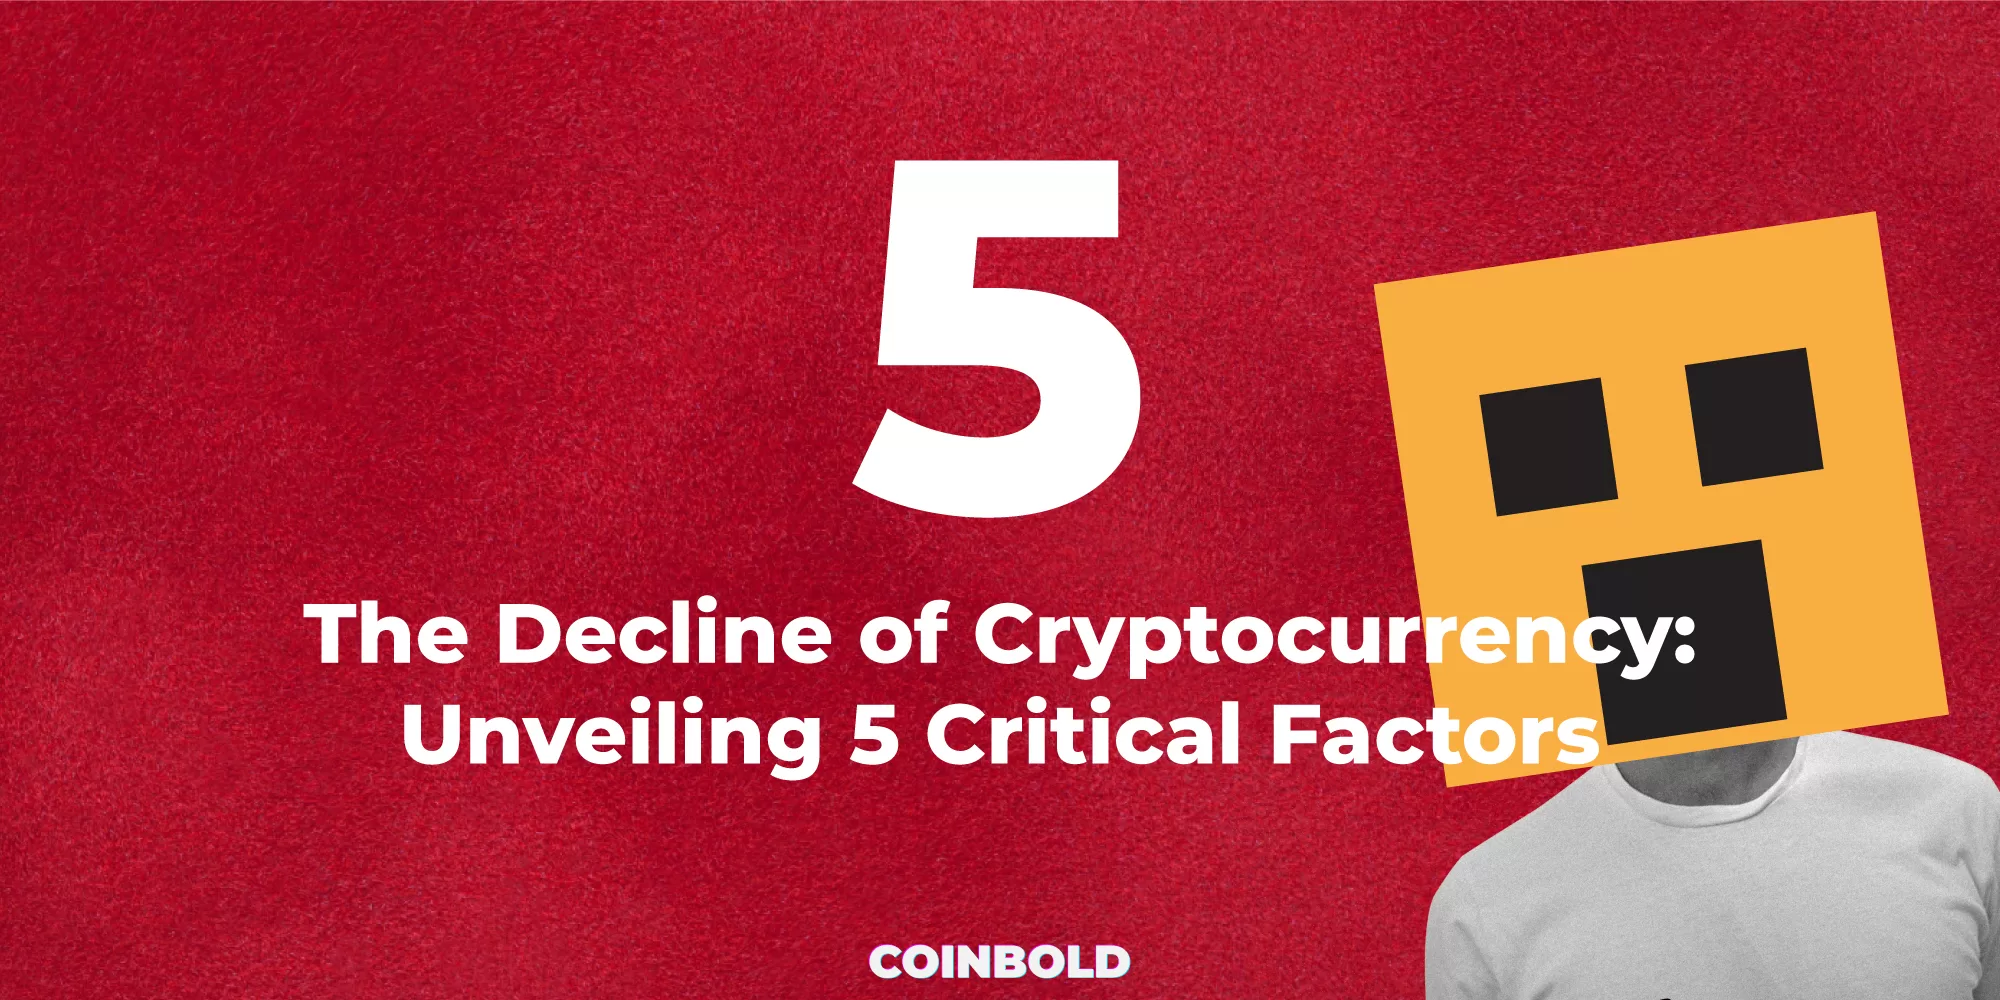 The Decline of Cryptocurrency Unveiling 5 Critical Factors